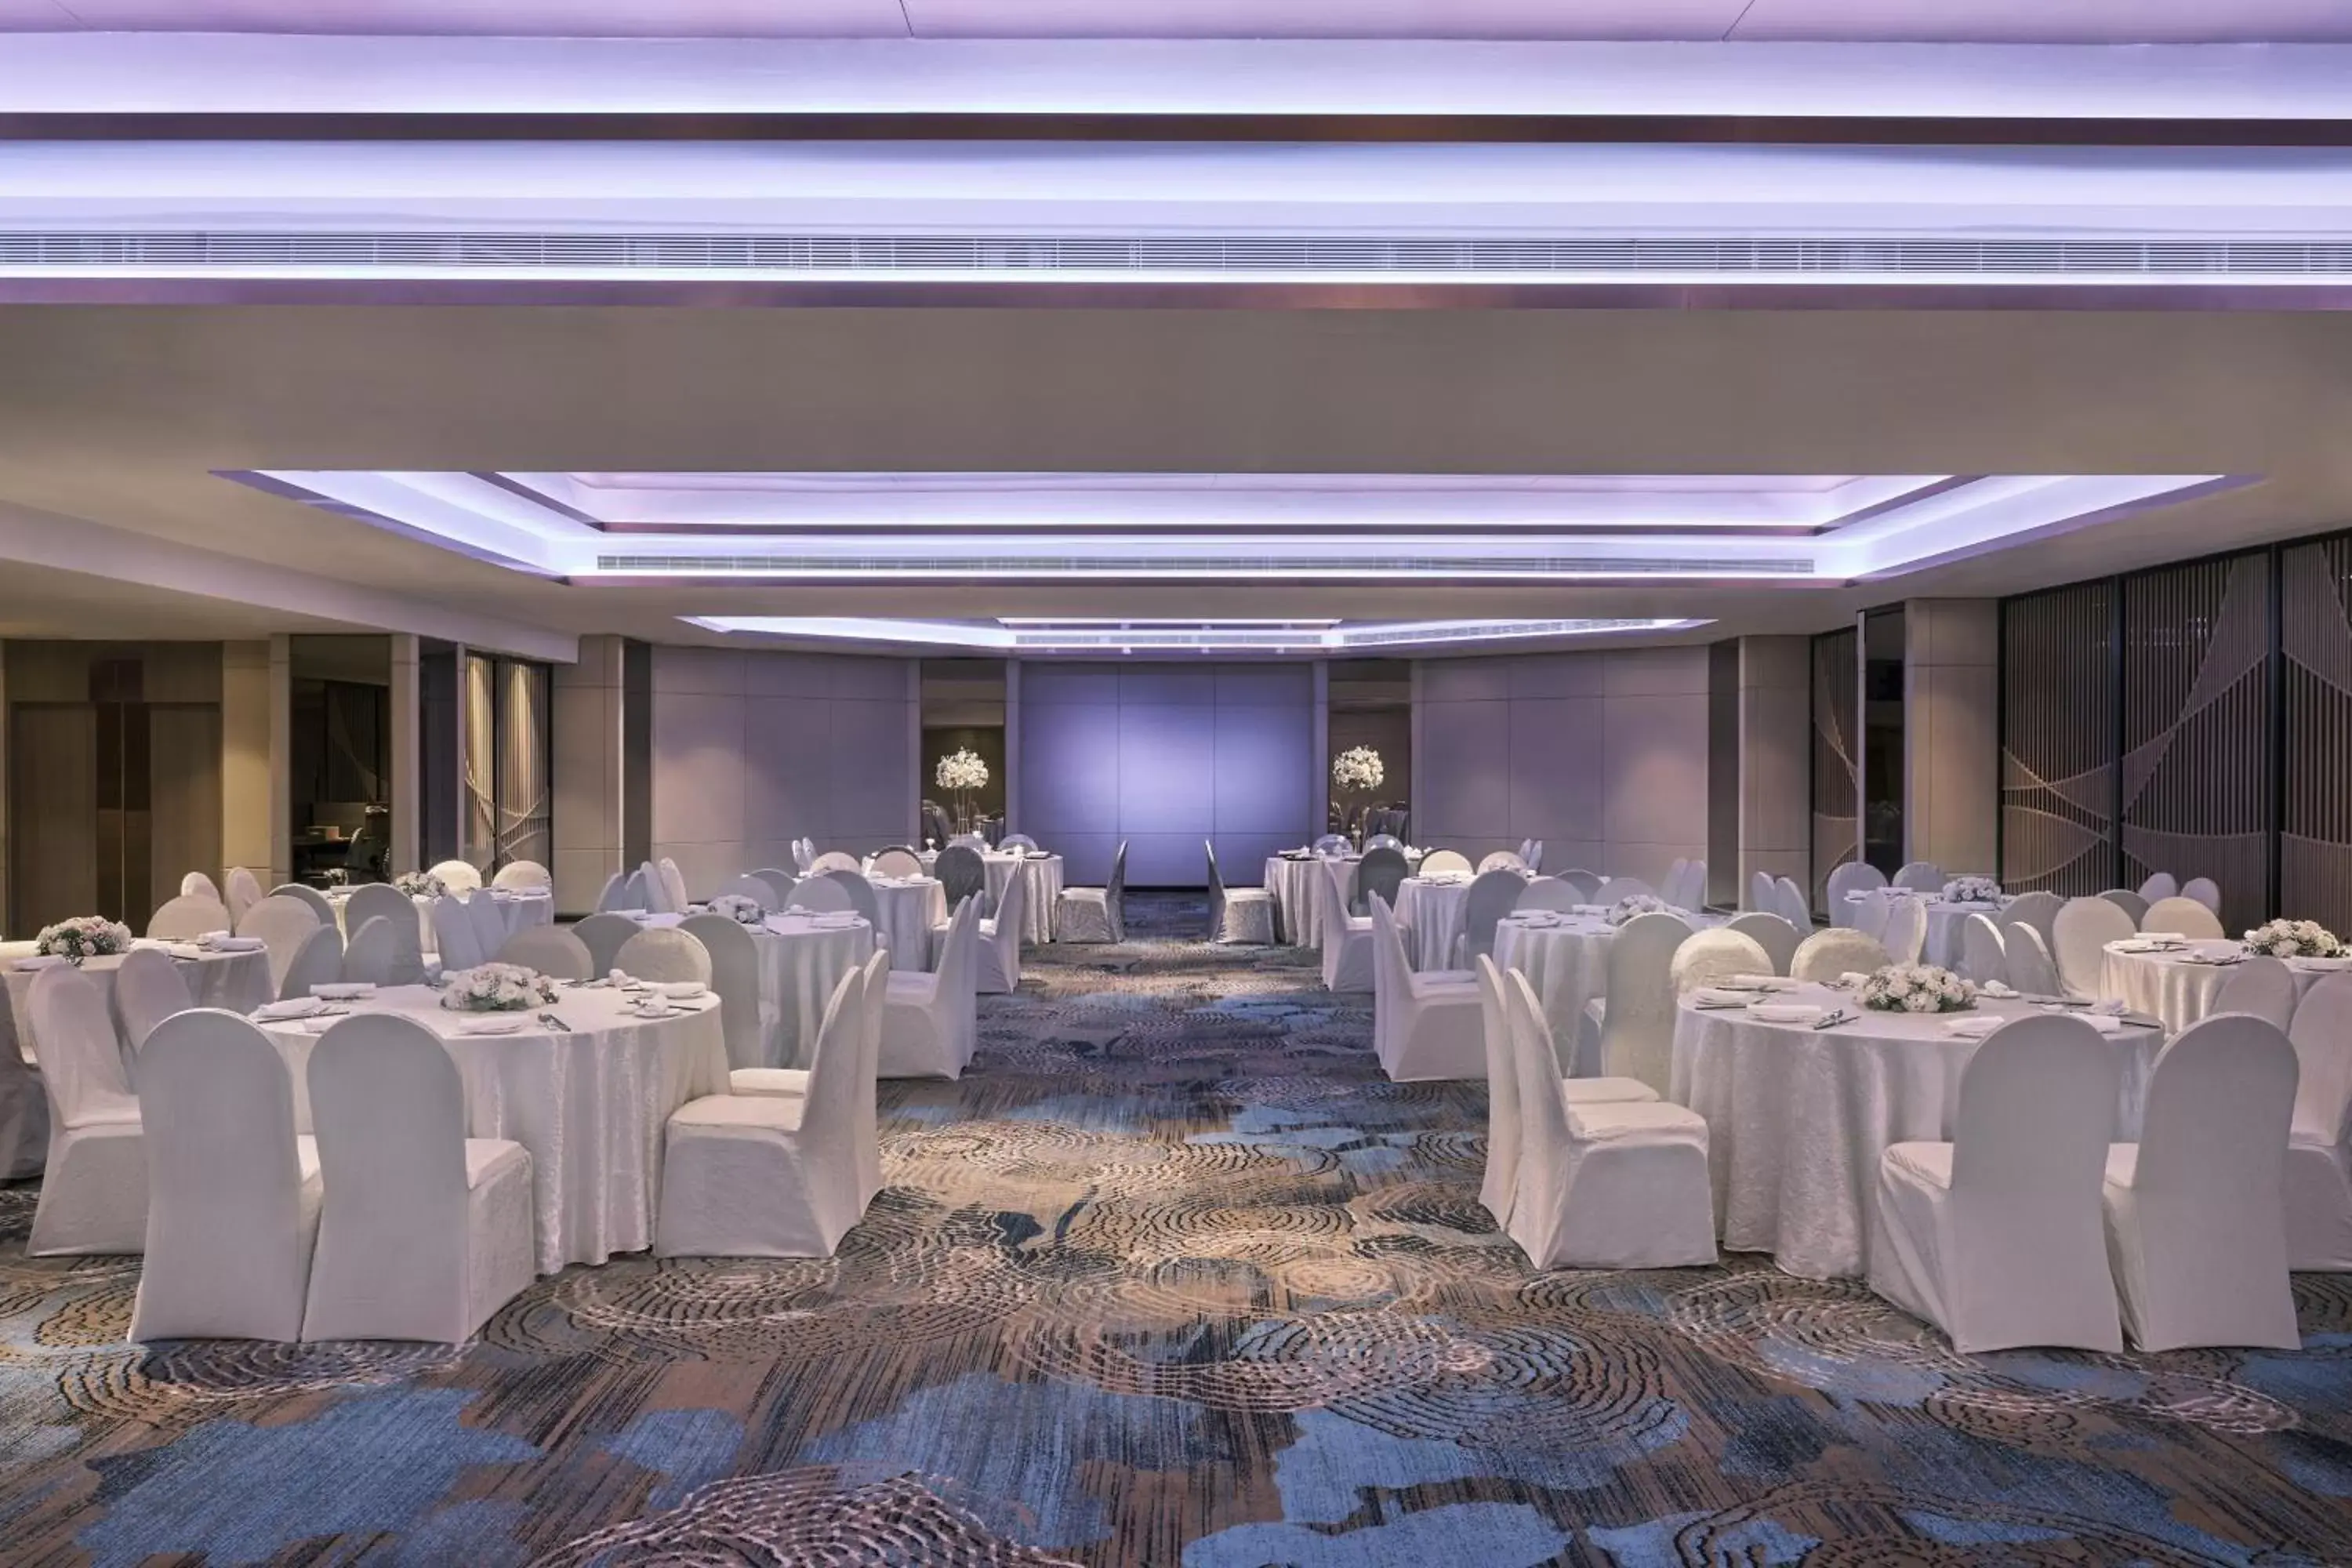 Banquet/Function facilities, Banquet Facilities in Four Points by Sheraton Singapore, Riverview